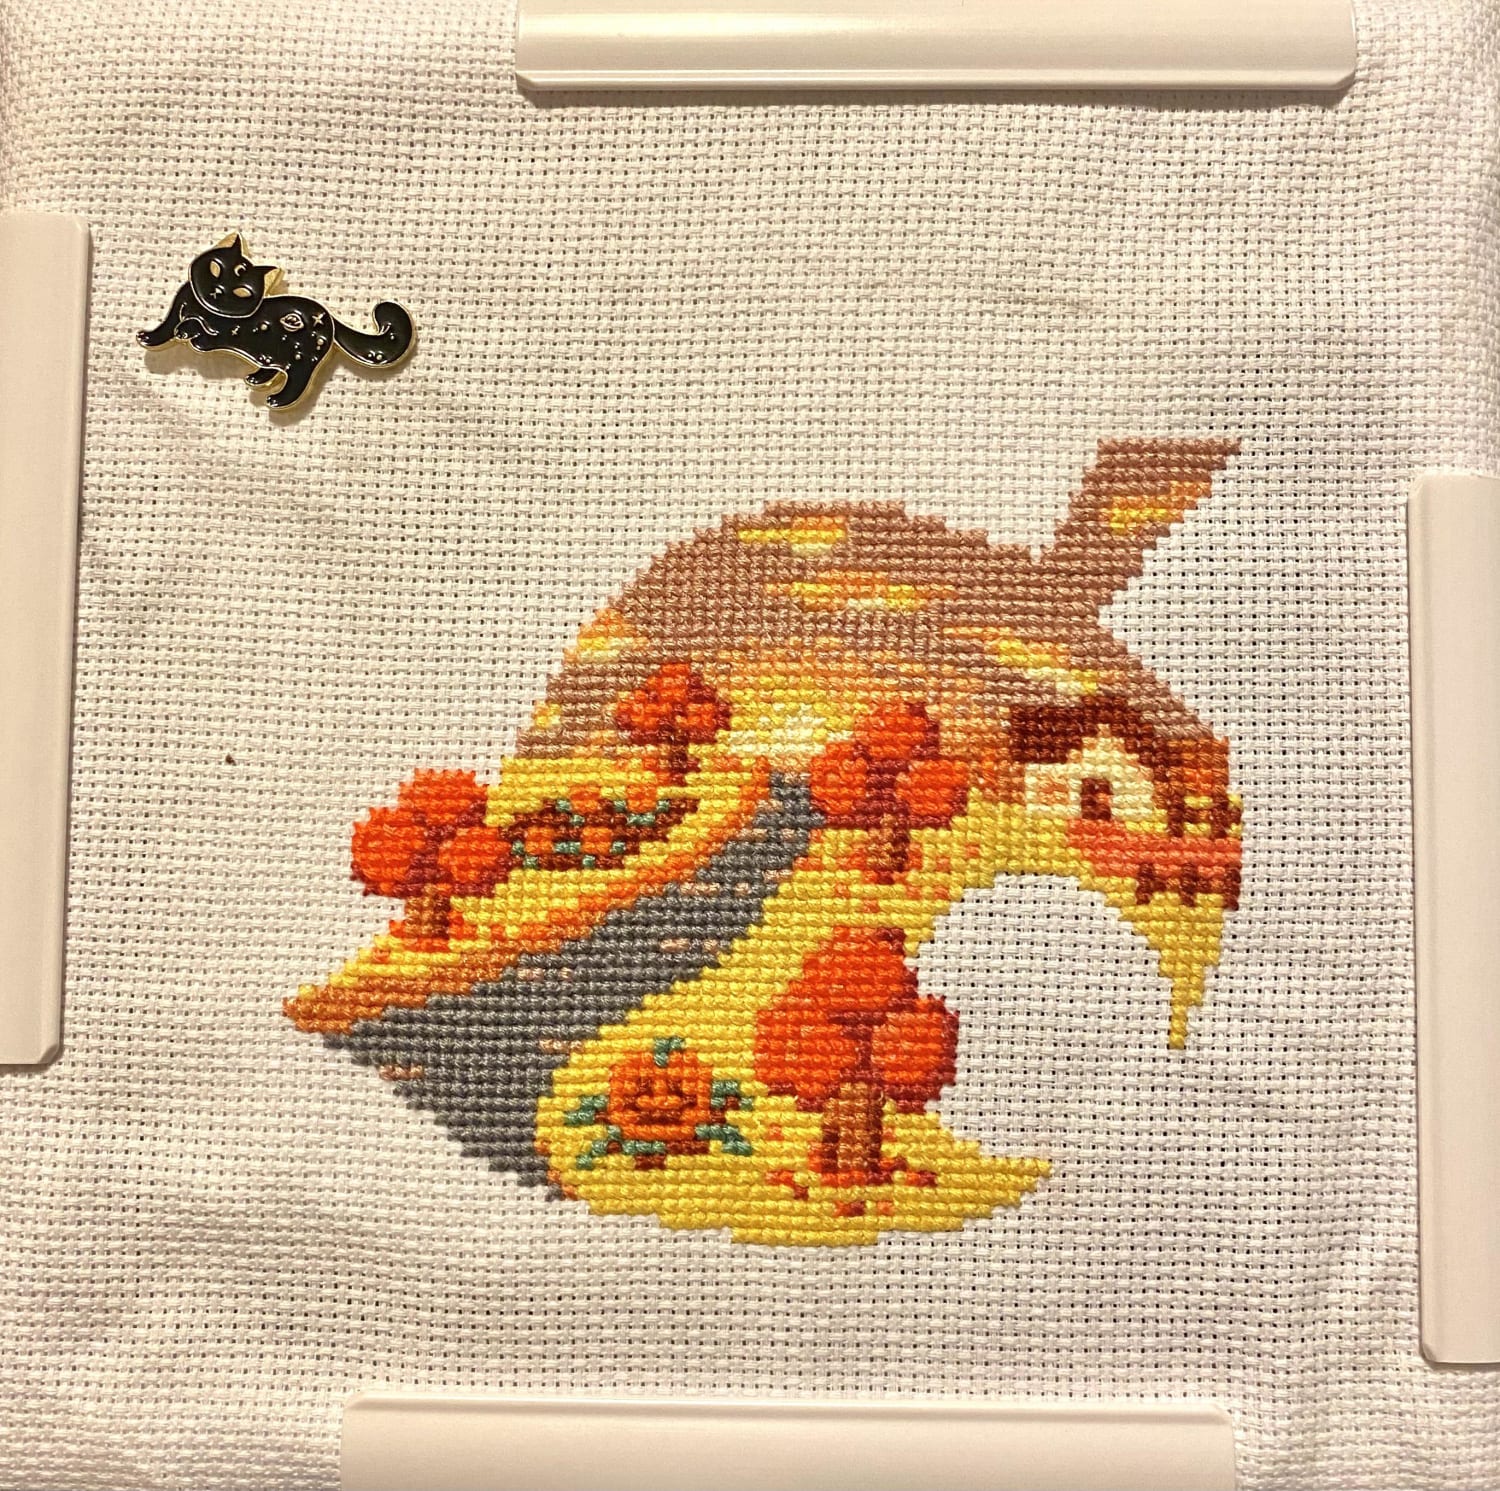 [FO] My first piece in almost 10 years, finally done!